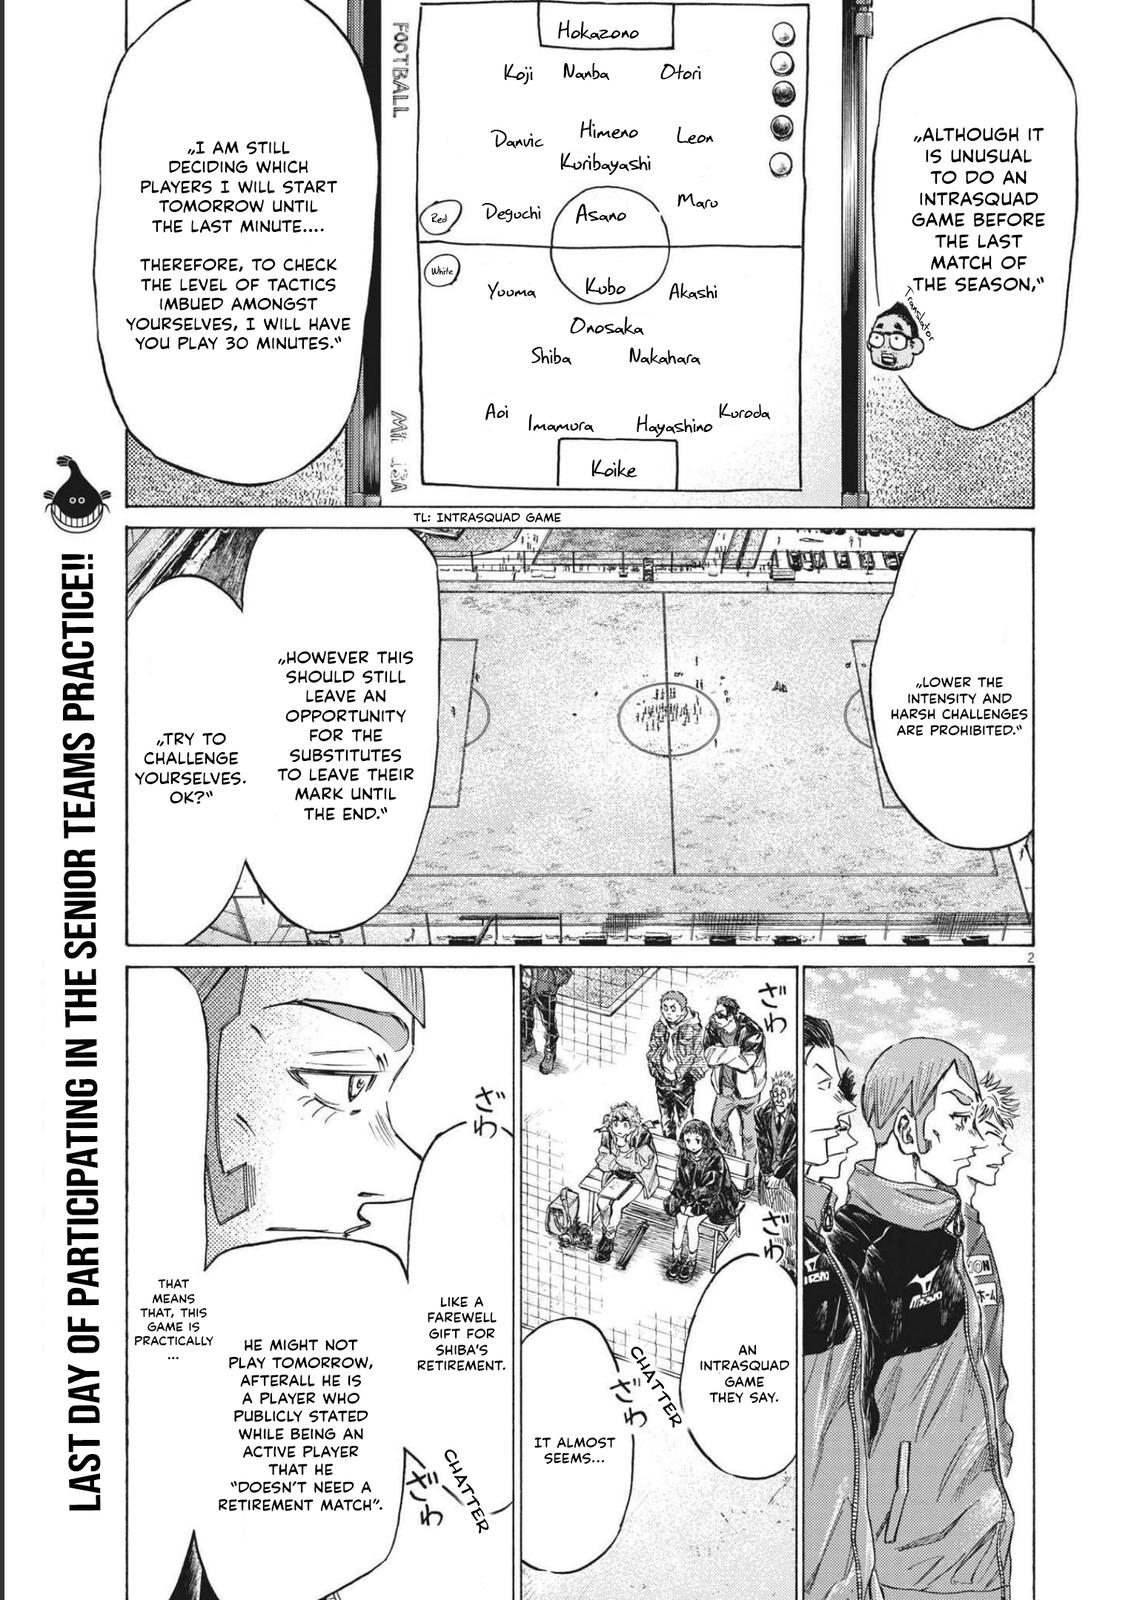 Ao Ashi, Chapter 298  TcbScans Org - Free Manga Online in High